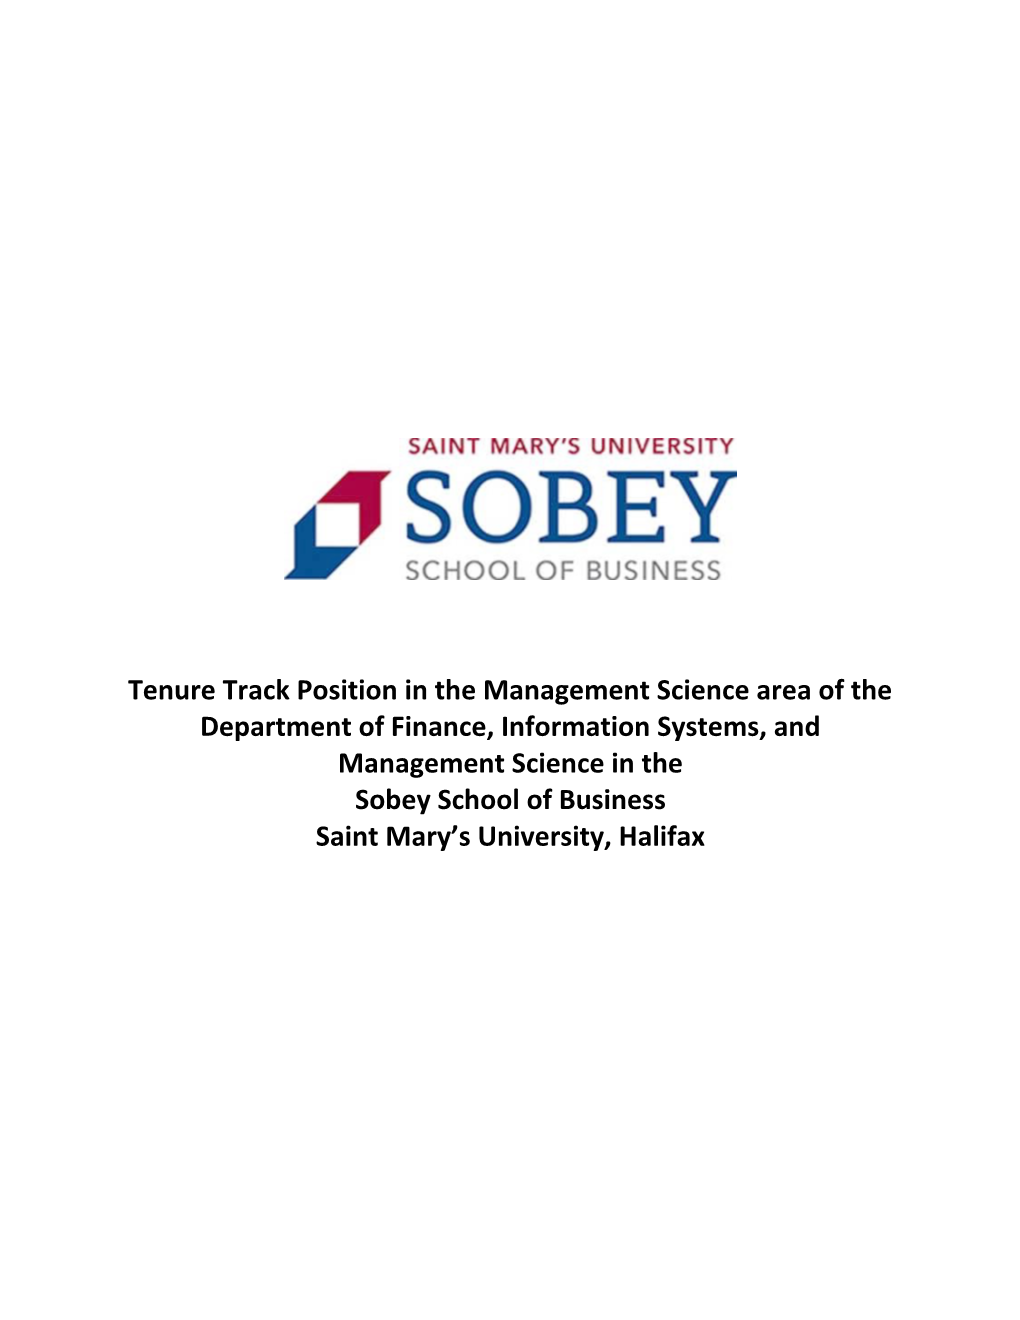 Tenure Track Position in the Management Science Area of the Department of Finance, Information